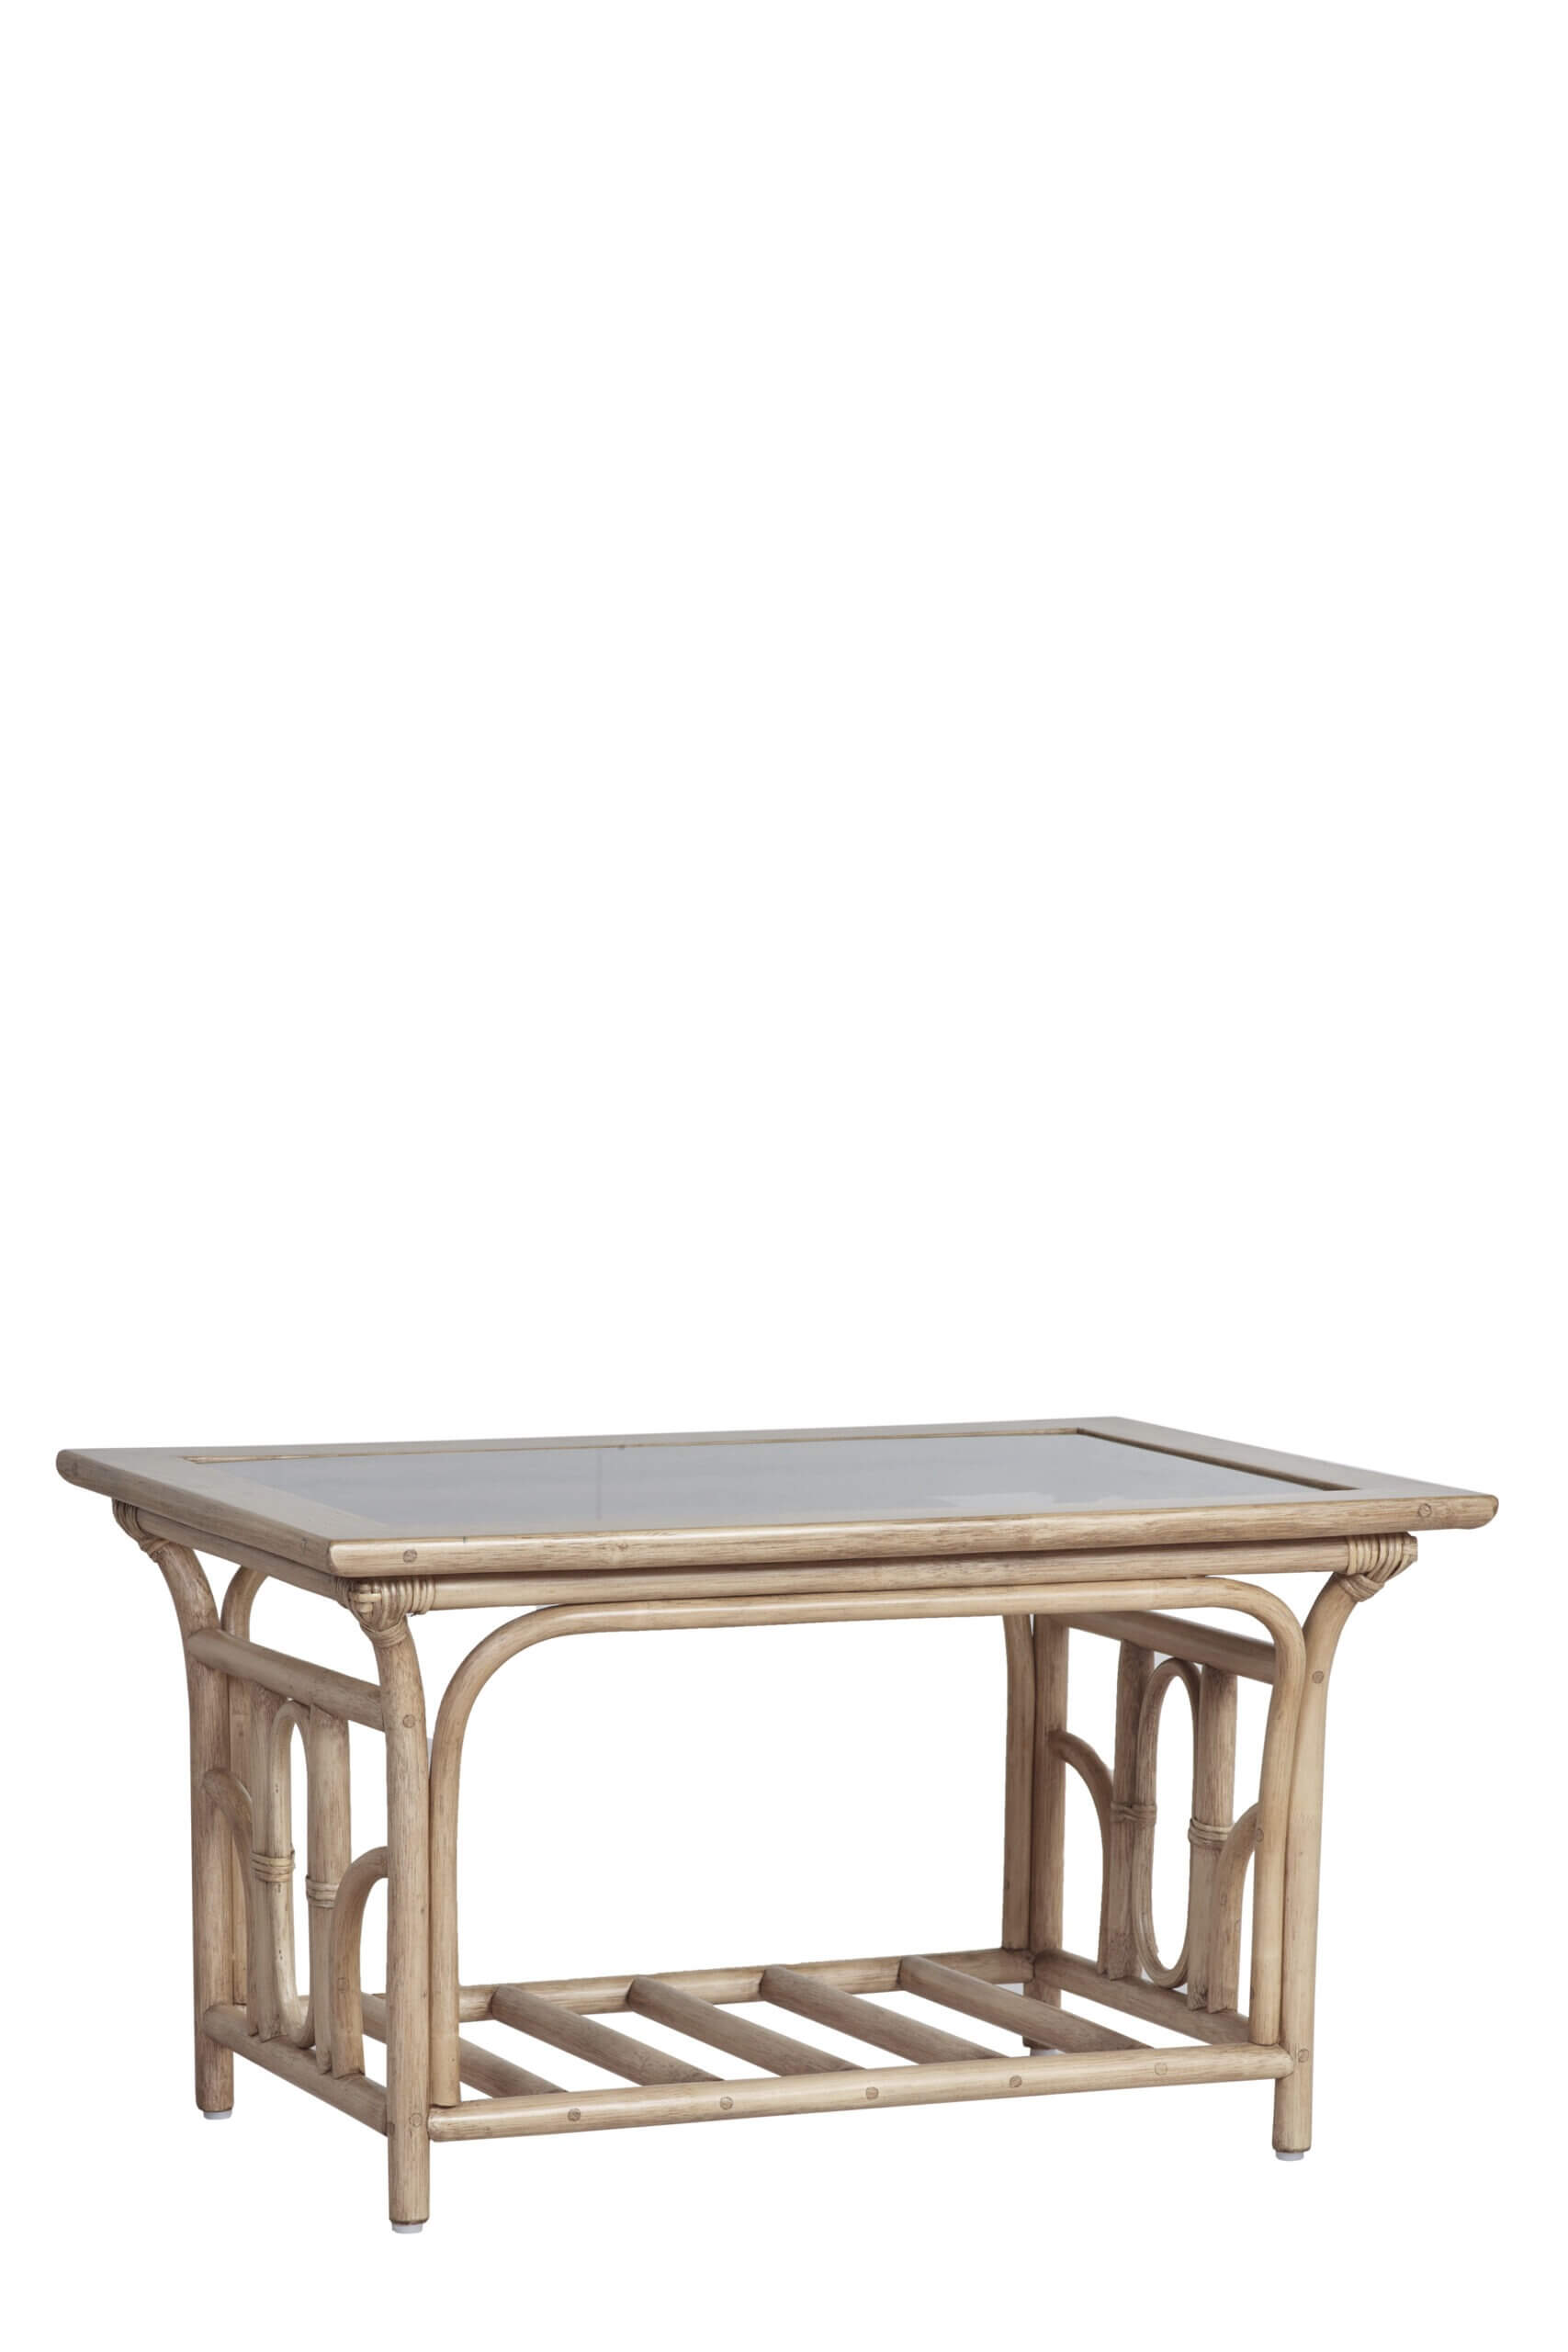 Showing image for Catania coffee table